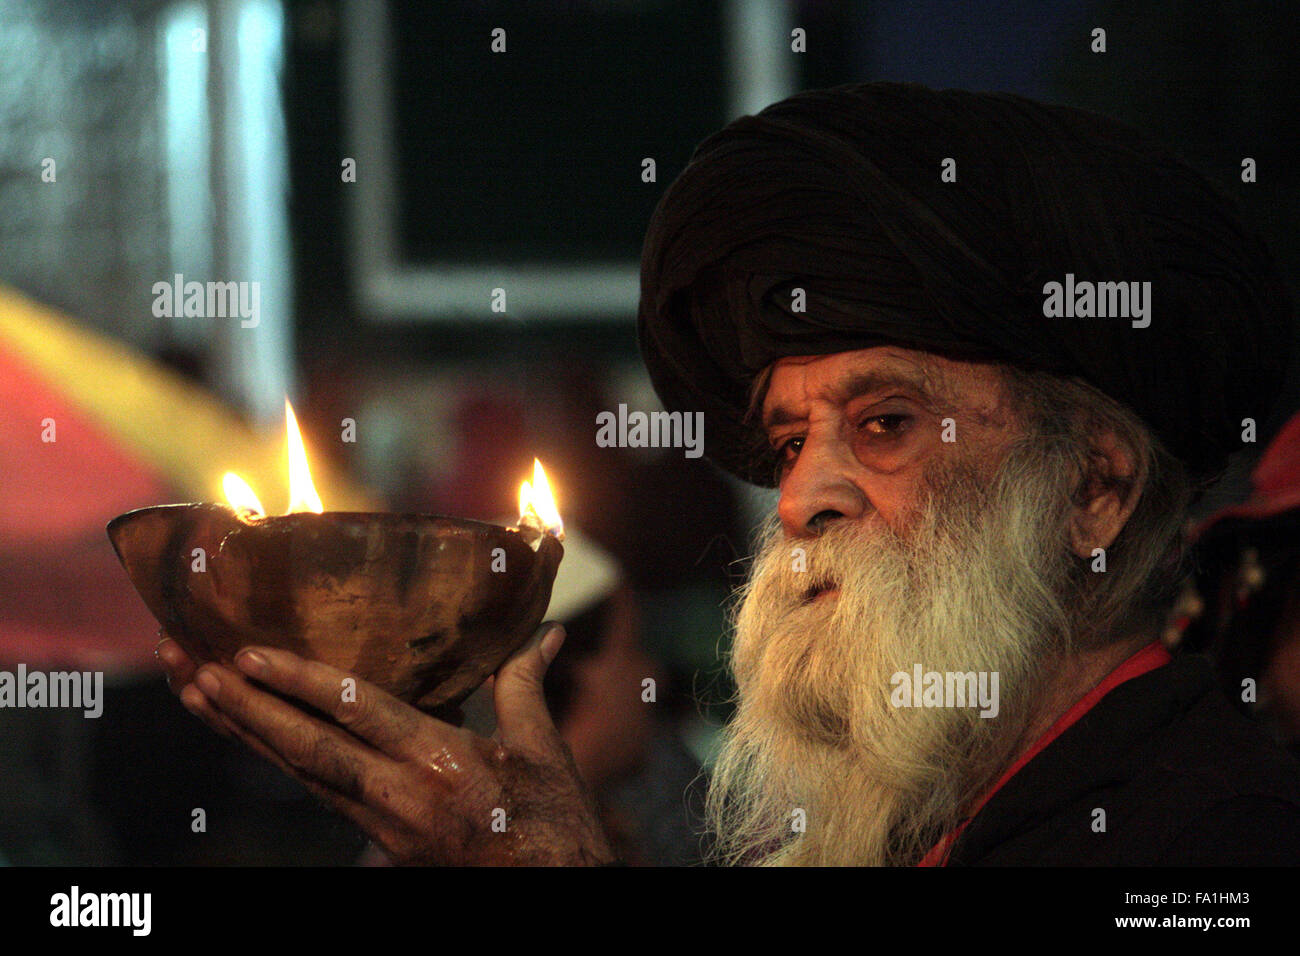 Lahore. 19th Dec, 2015. A Muslim devotee holds an oil lamp at the shrine of the Sufi saint Mian Mir Sahib during a festival to mark the saint's death anniversary in eastern Pakistan's Lahore, Dec. 19, 2015. Hundreds of devotees are attending the two-day festival. © Jamil Ahmed/Xinhua/Alamy Live News Stock Photo